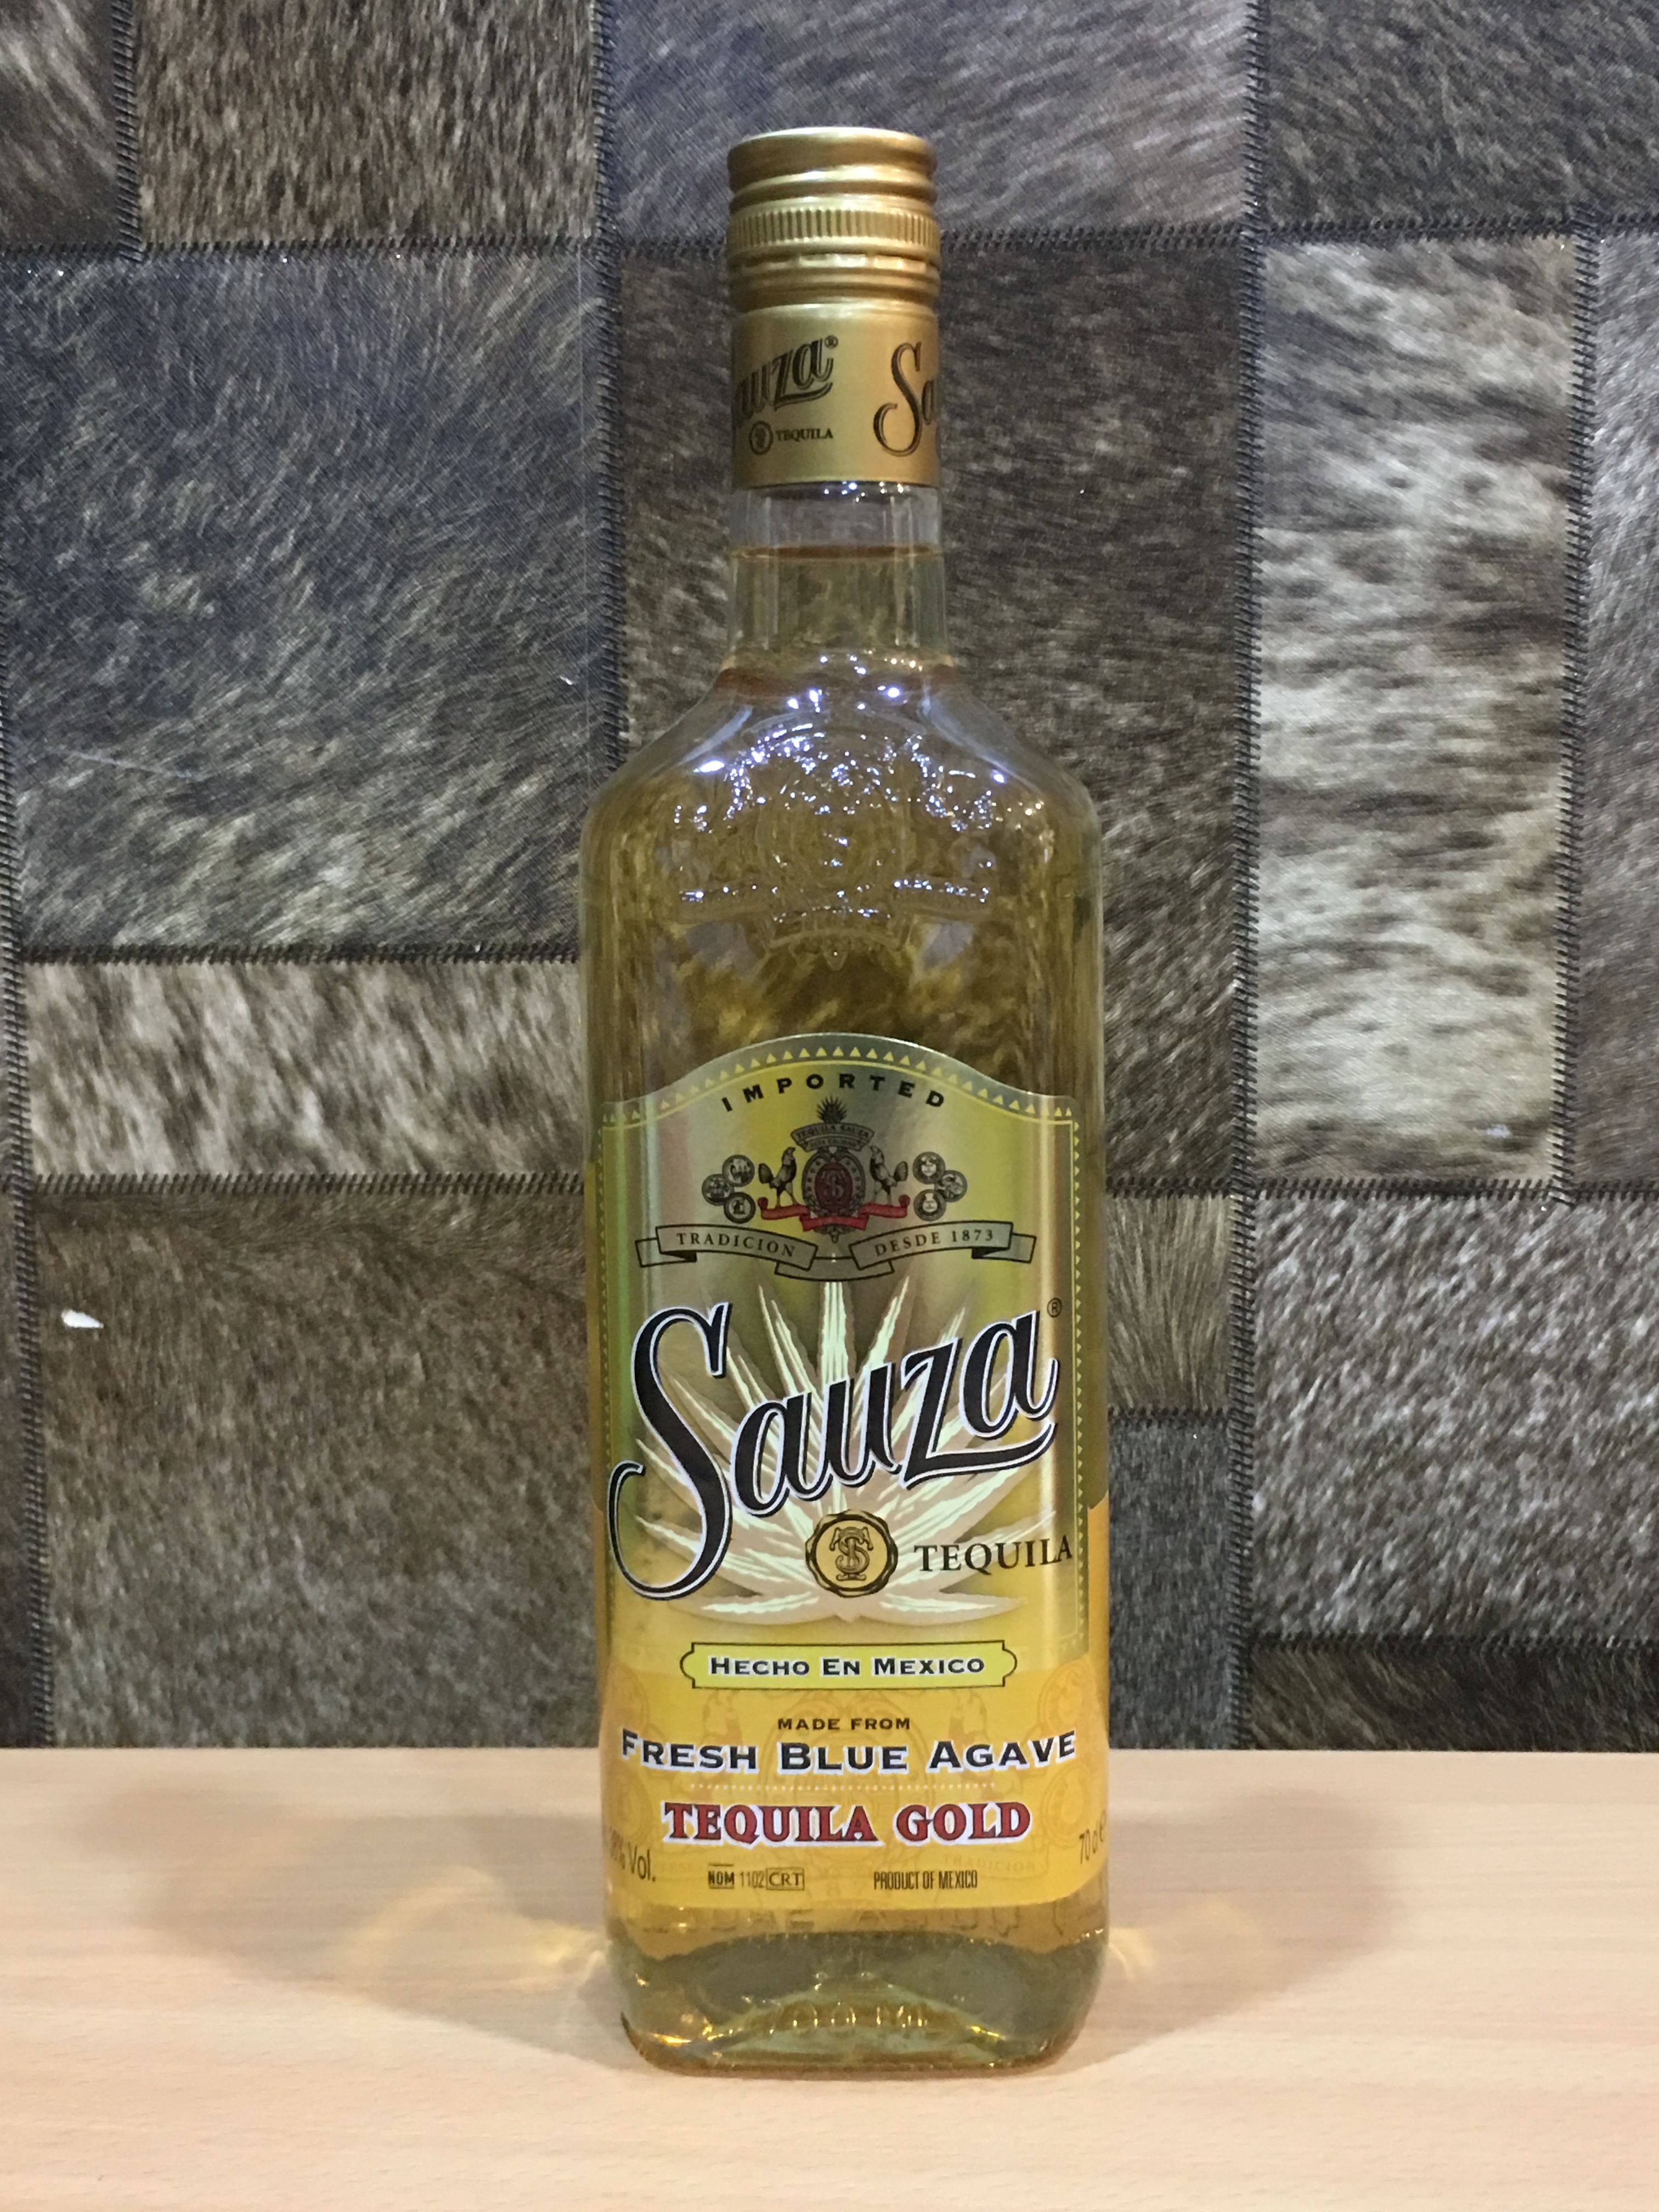 Sauza Gold Tequila, 75cl, Acl: 38% 